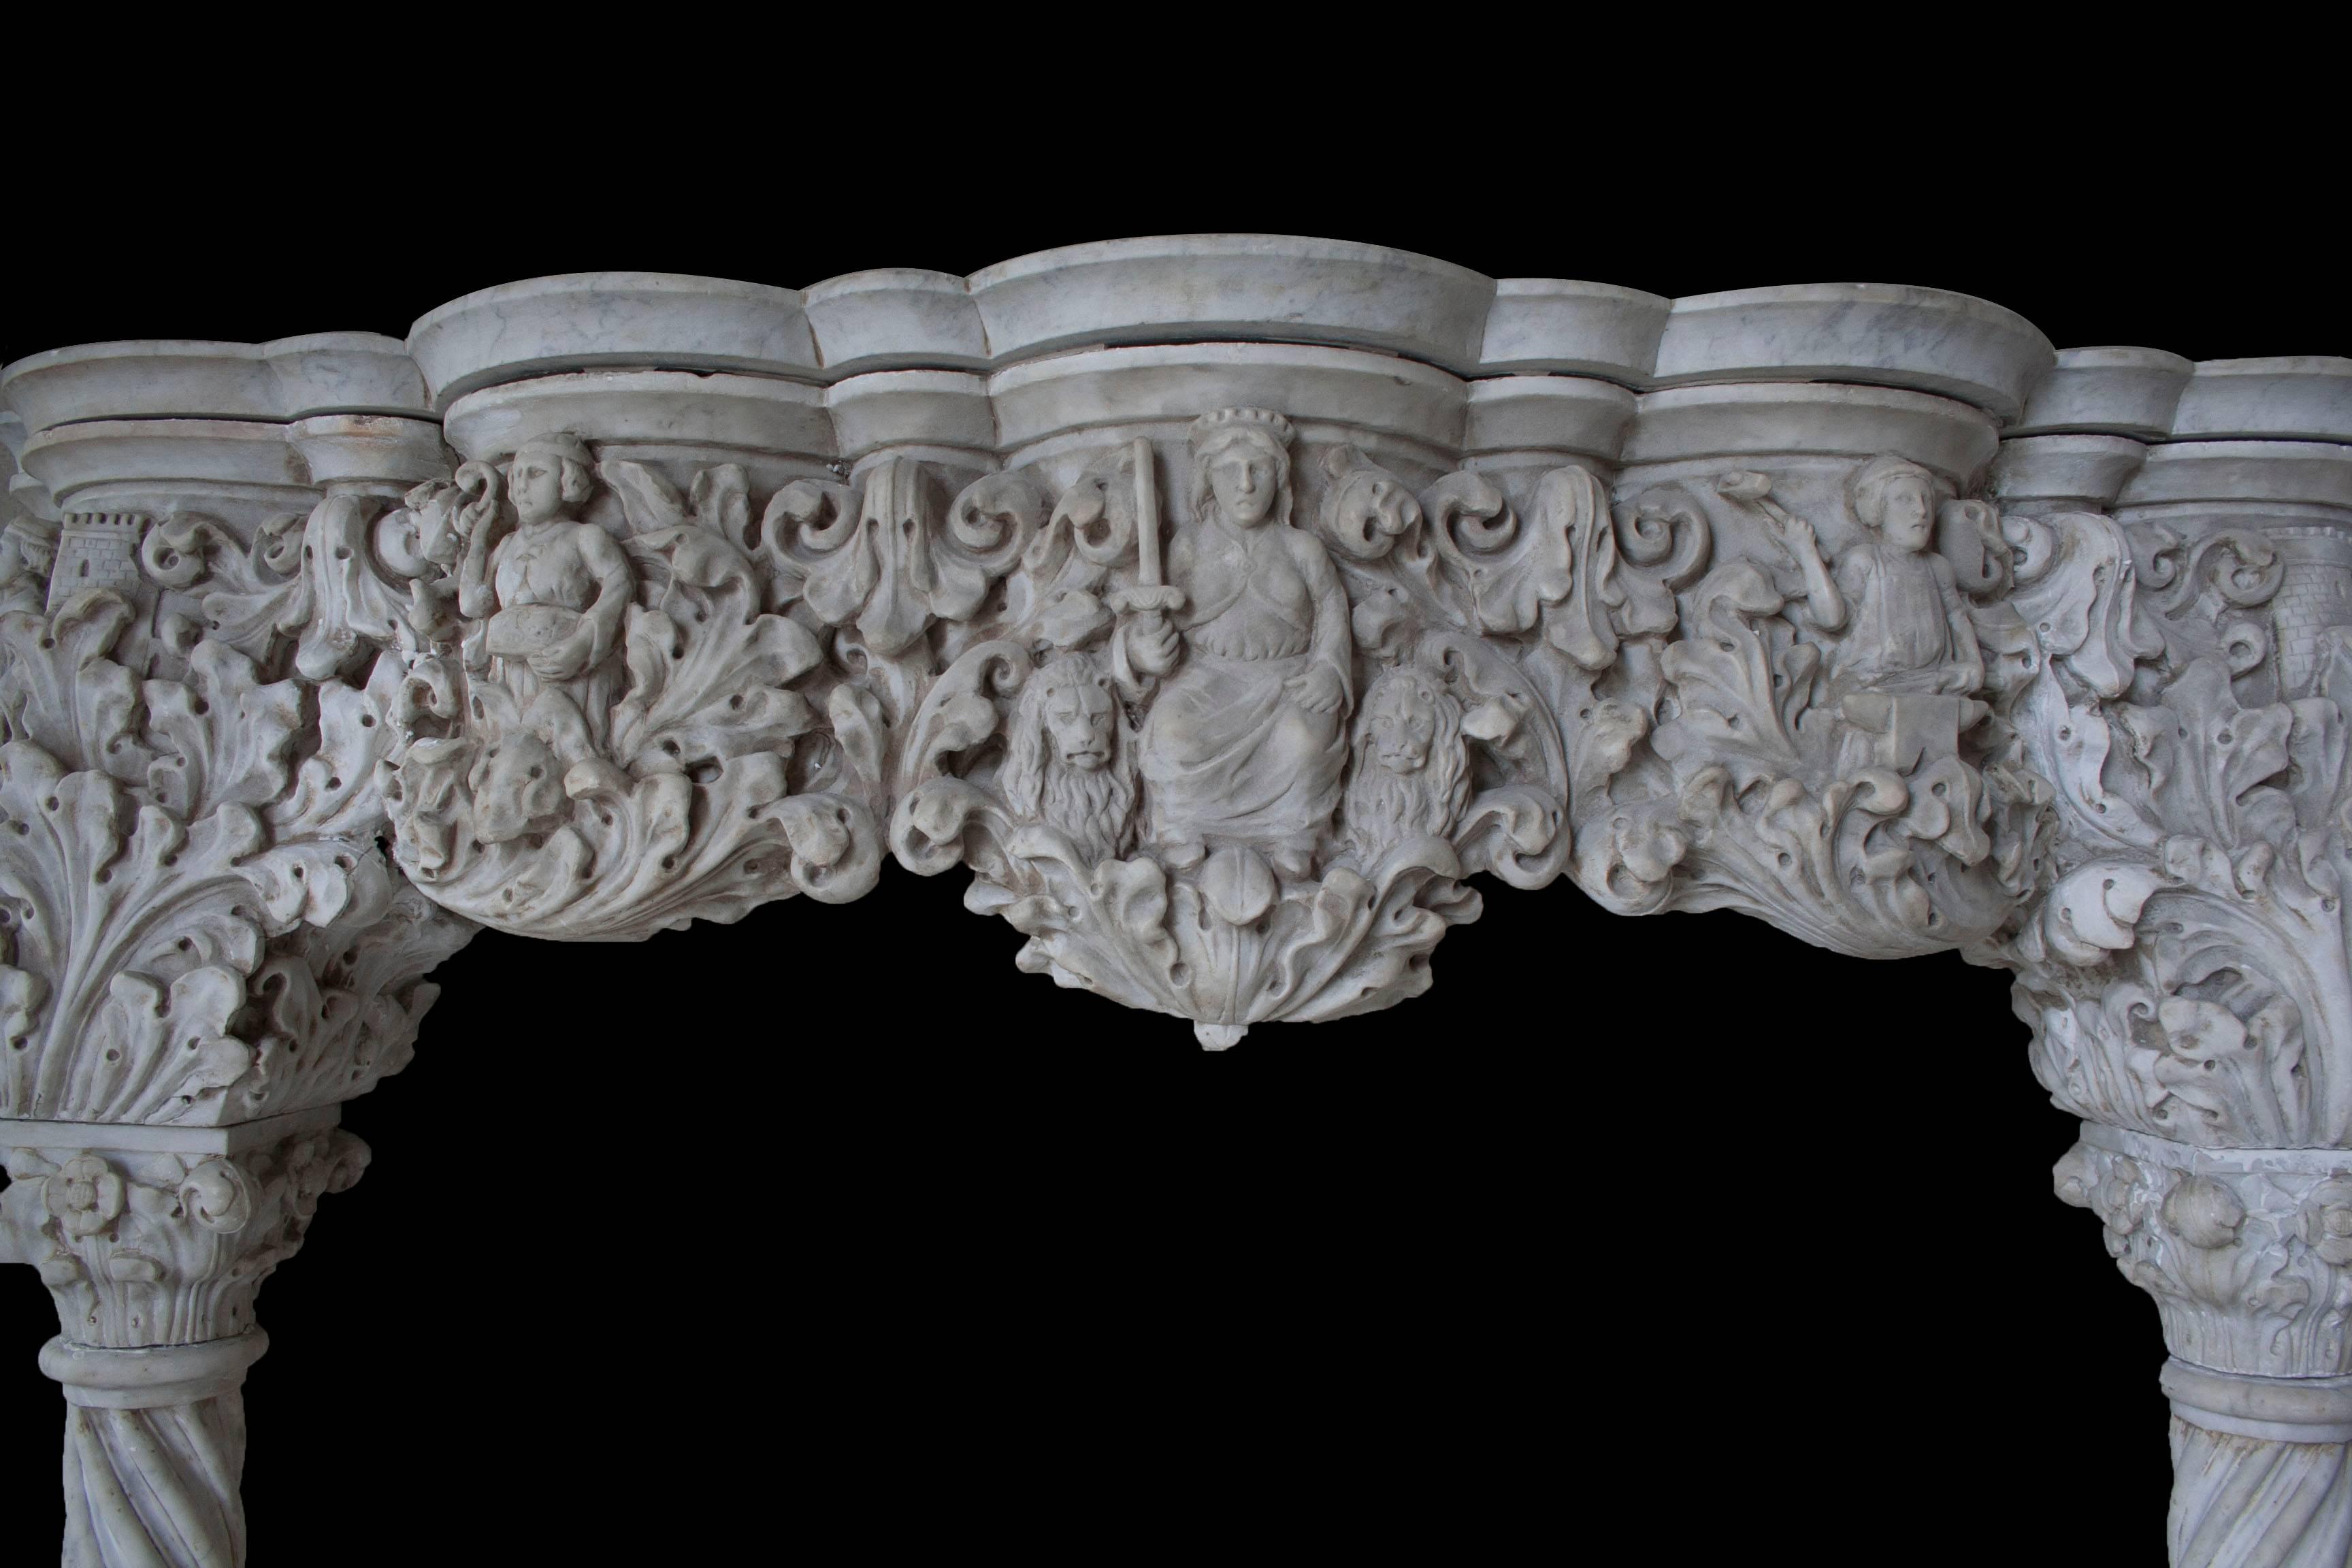 Ornate venetian carrara mantel in the Gothic style. Showcasing a highly detailed frieze featuring a royal court, castle towers, and acanthus leaves. supported by lions carrying barley-twist columns.

Opening width: 50".